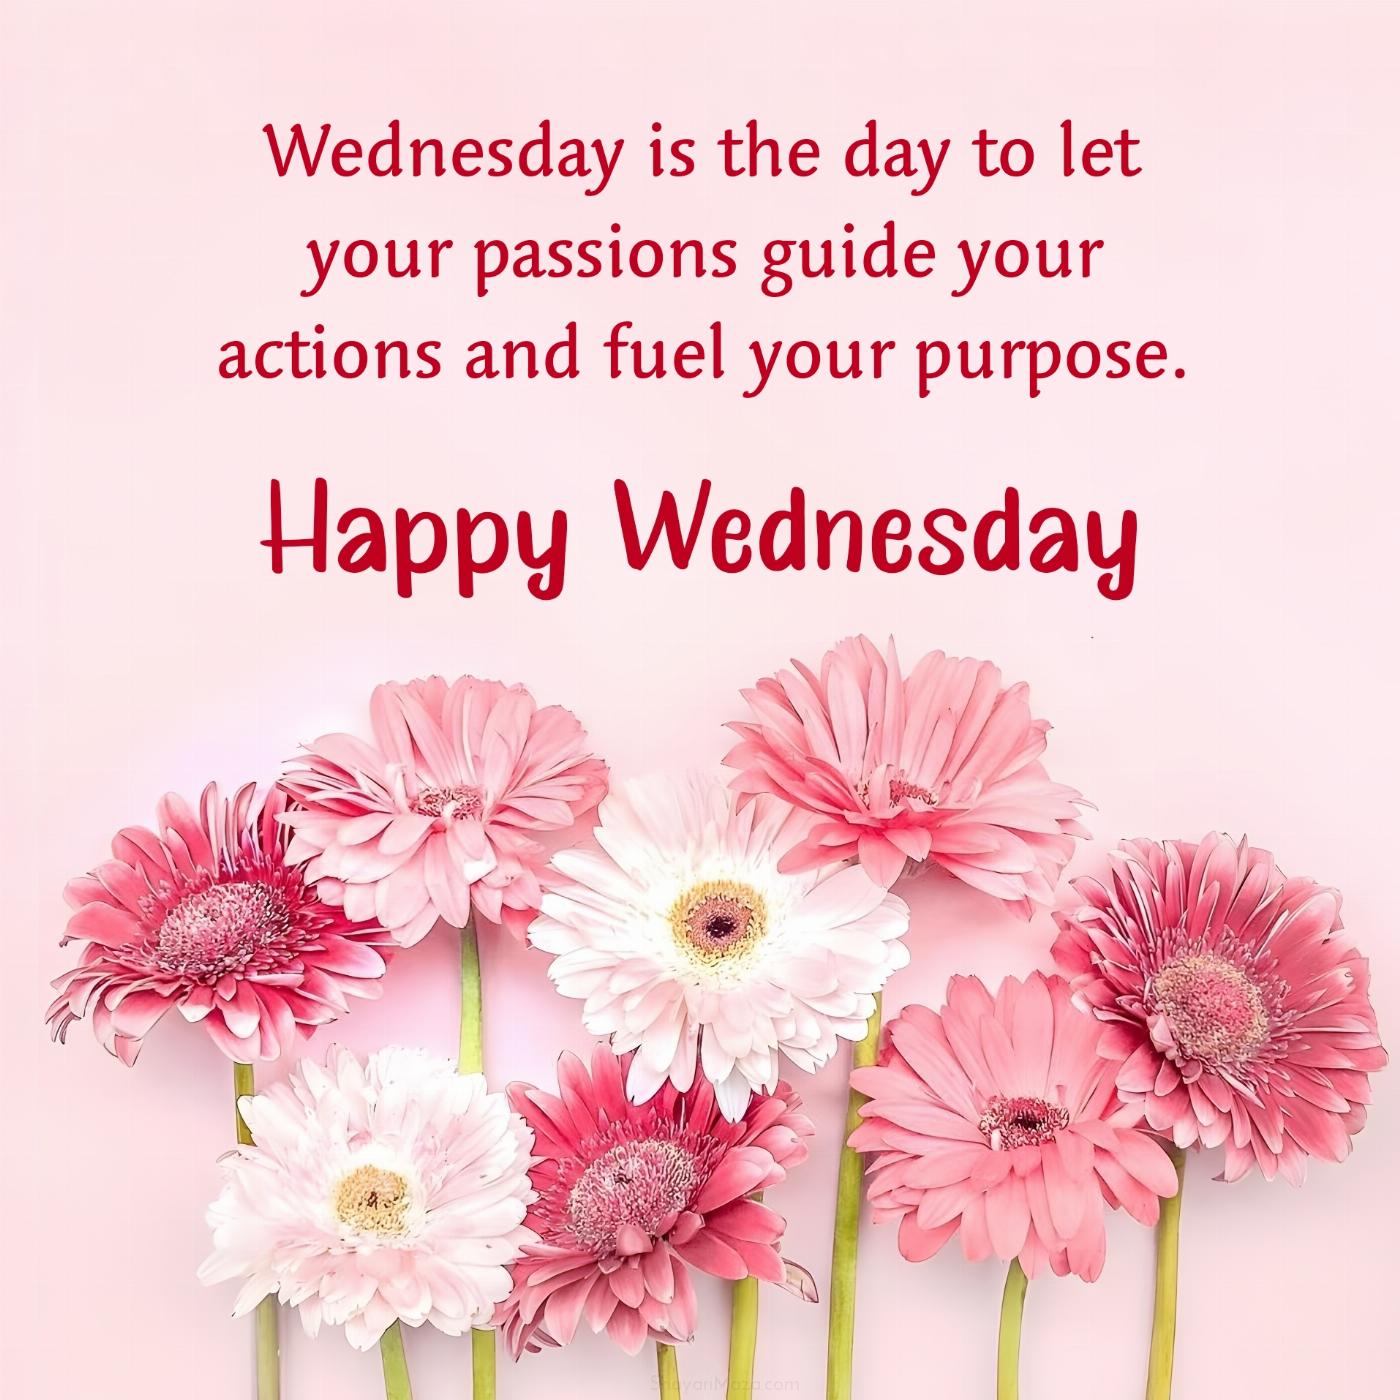 Wednesday is the day to let your passions guide your actions